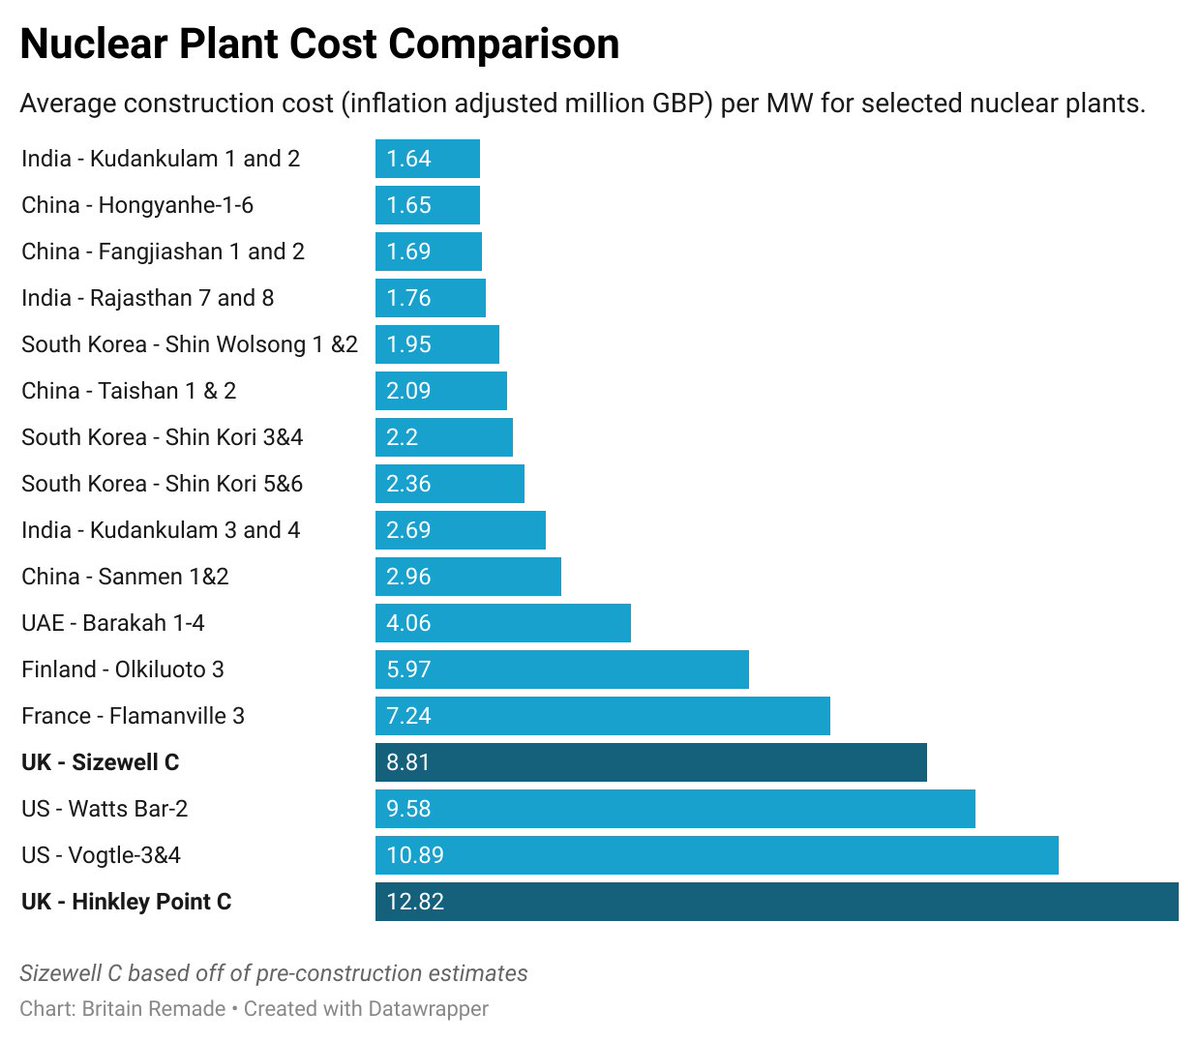 Hinkley Point C is the most expensive nuclear plant built this century! 

It's faced planning and regulatory hurdles, financing challenges, a depleted skills base, and 7,000 design tweaks to satisfy the Office for Nuclear Regulation.